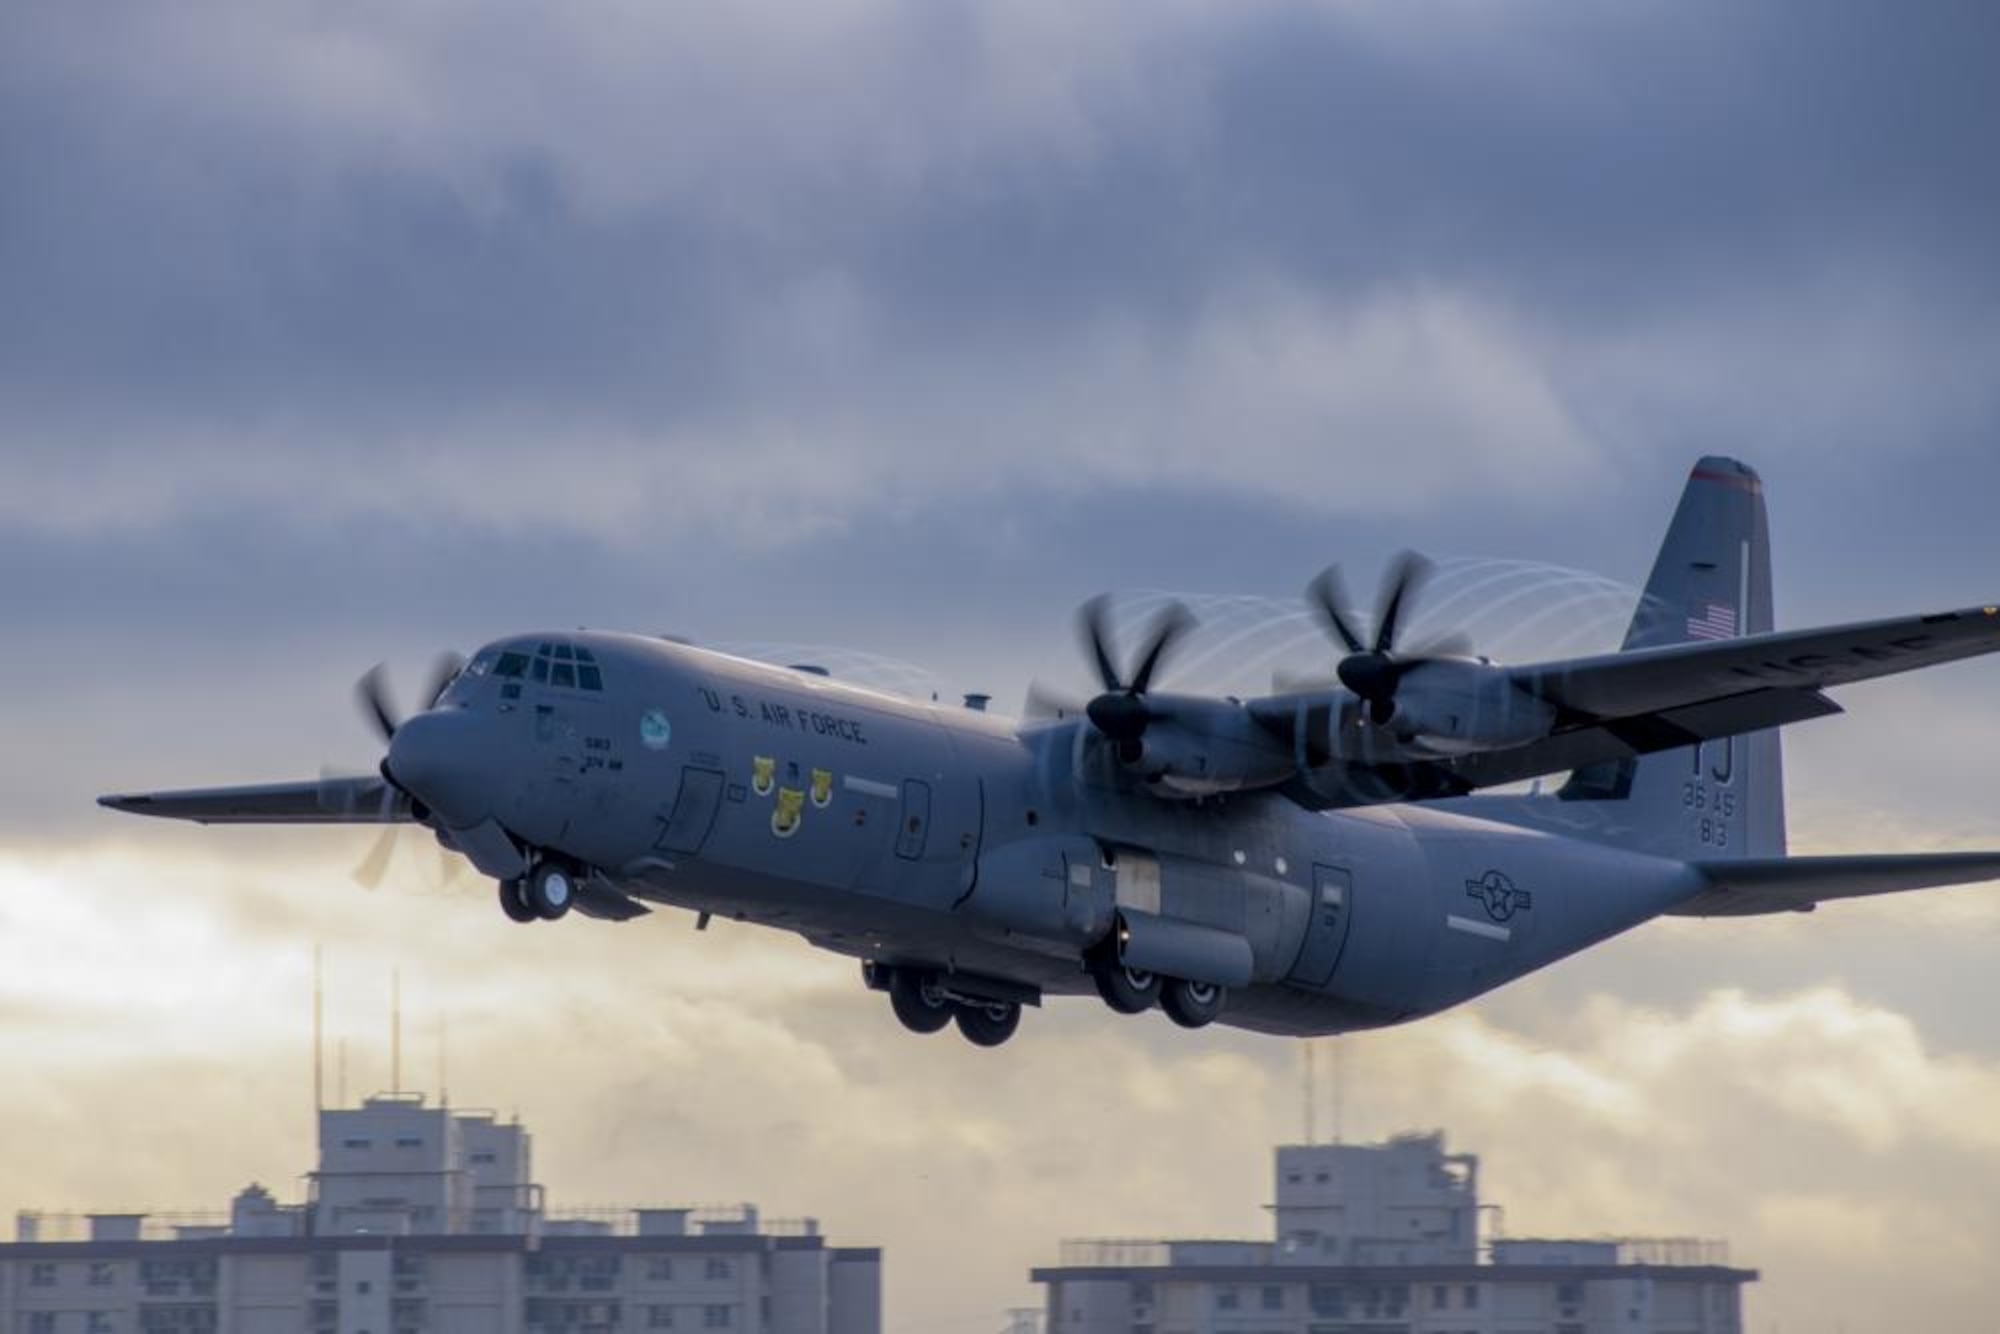 An Air Force C-130J Super Hercules assigned to the 36th Airlift Squadron takes off at Yokota Air Base, Japan, Dec. 1, 2021 in support of the 70th annual Operation Christmas Drop. Due to the geographical area covered by OCD, there are logistical challenges to High Availability/Disaster Recovery support. OCD allows our Airmen to rise to the challenge and find innovative solutions, demonstrating their constant readiness and willingness to solve problems no matter the circumstance. (U.S. Air Force photo by Yasuo Osakabe)